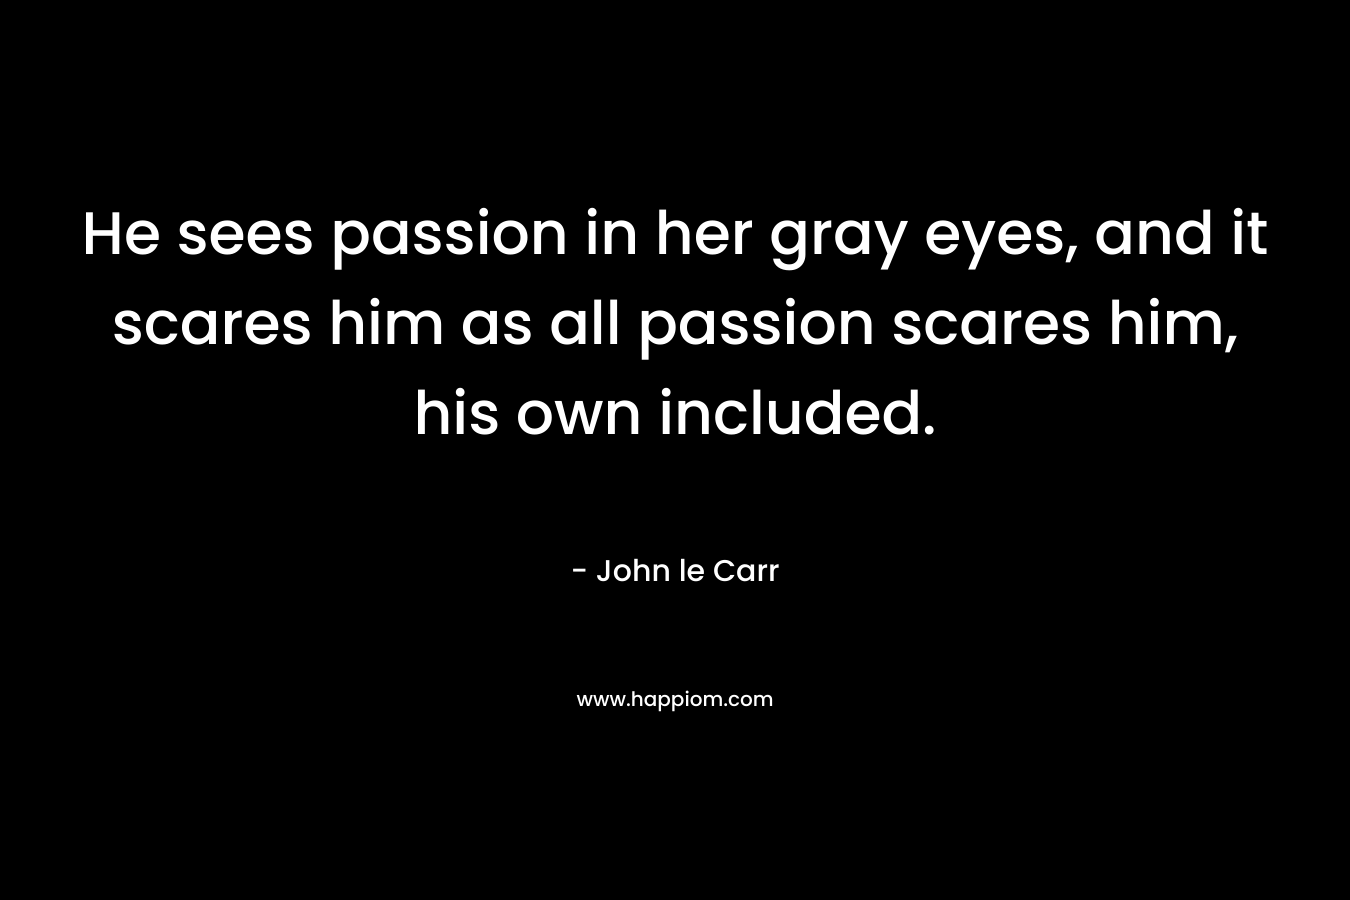 He sees passion in her gray eyes, and it scares him as all passion scares him, his own included. – John le Carr